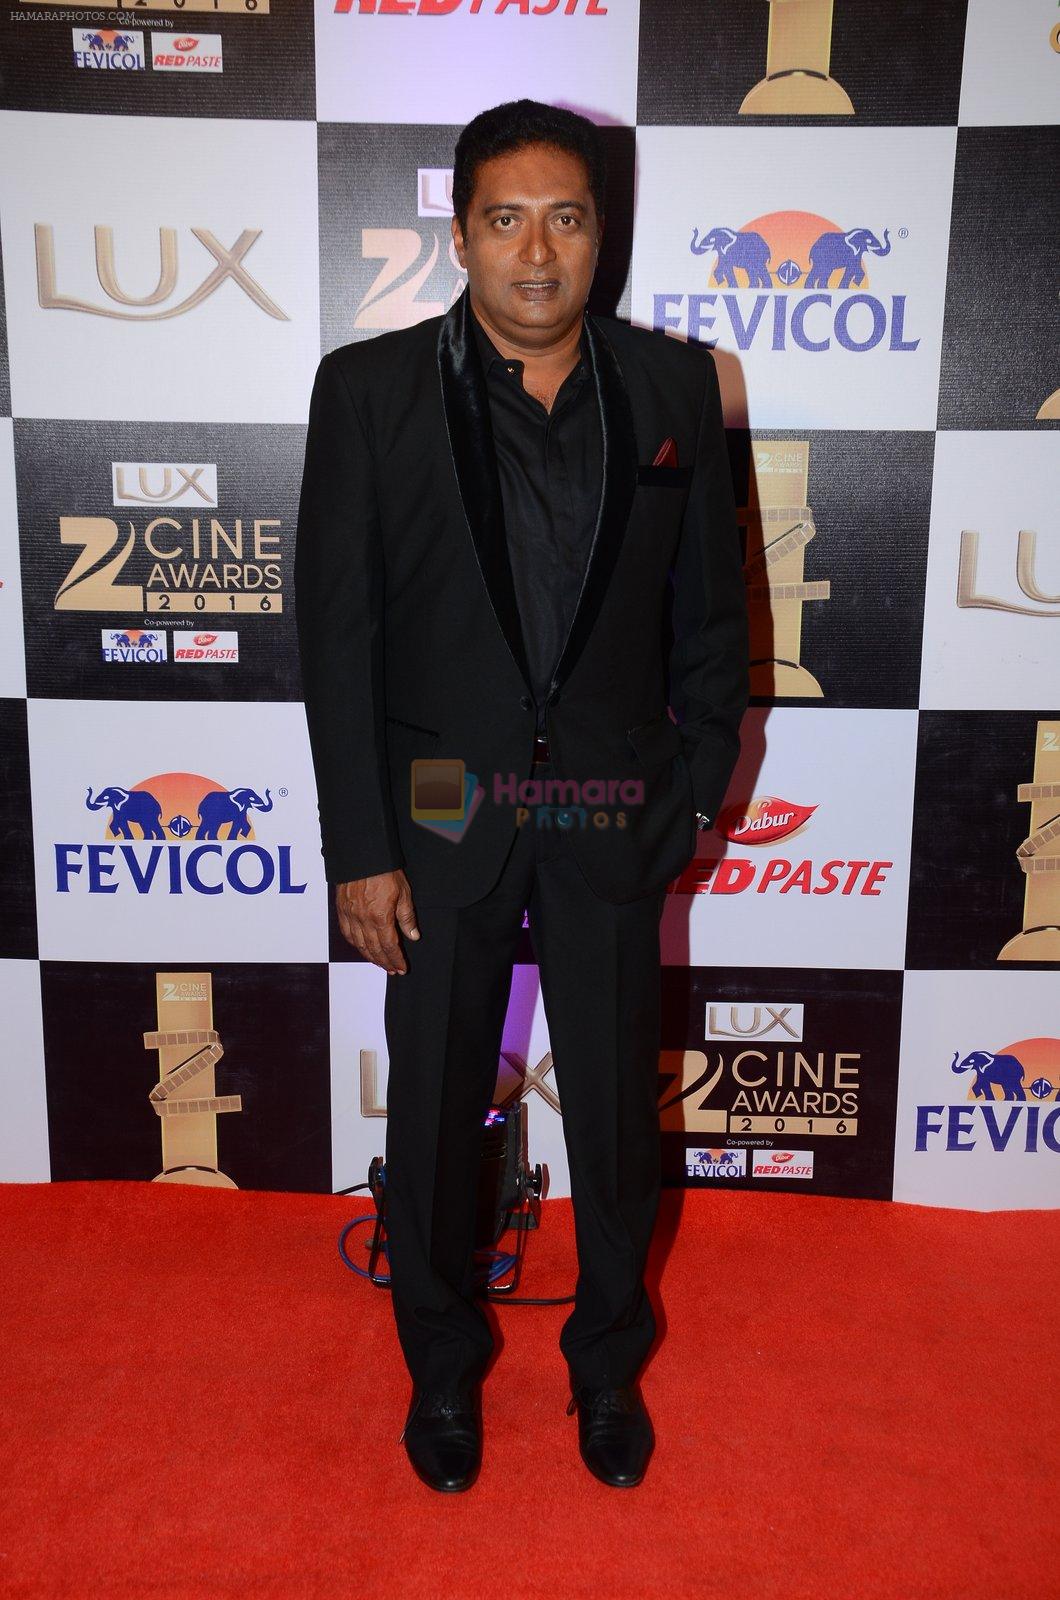 at zee cine awards 2016 on 20th Feb 2016